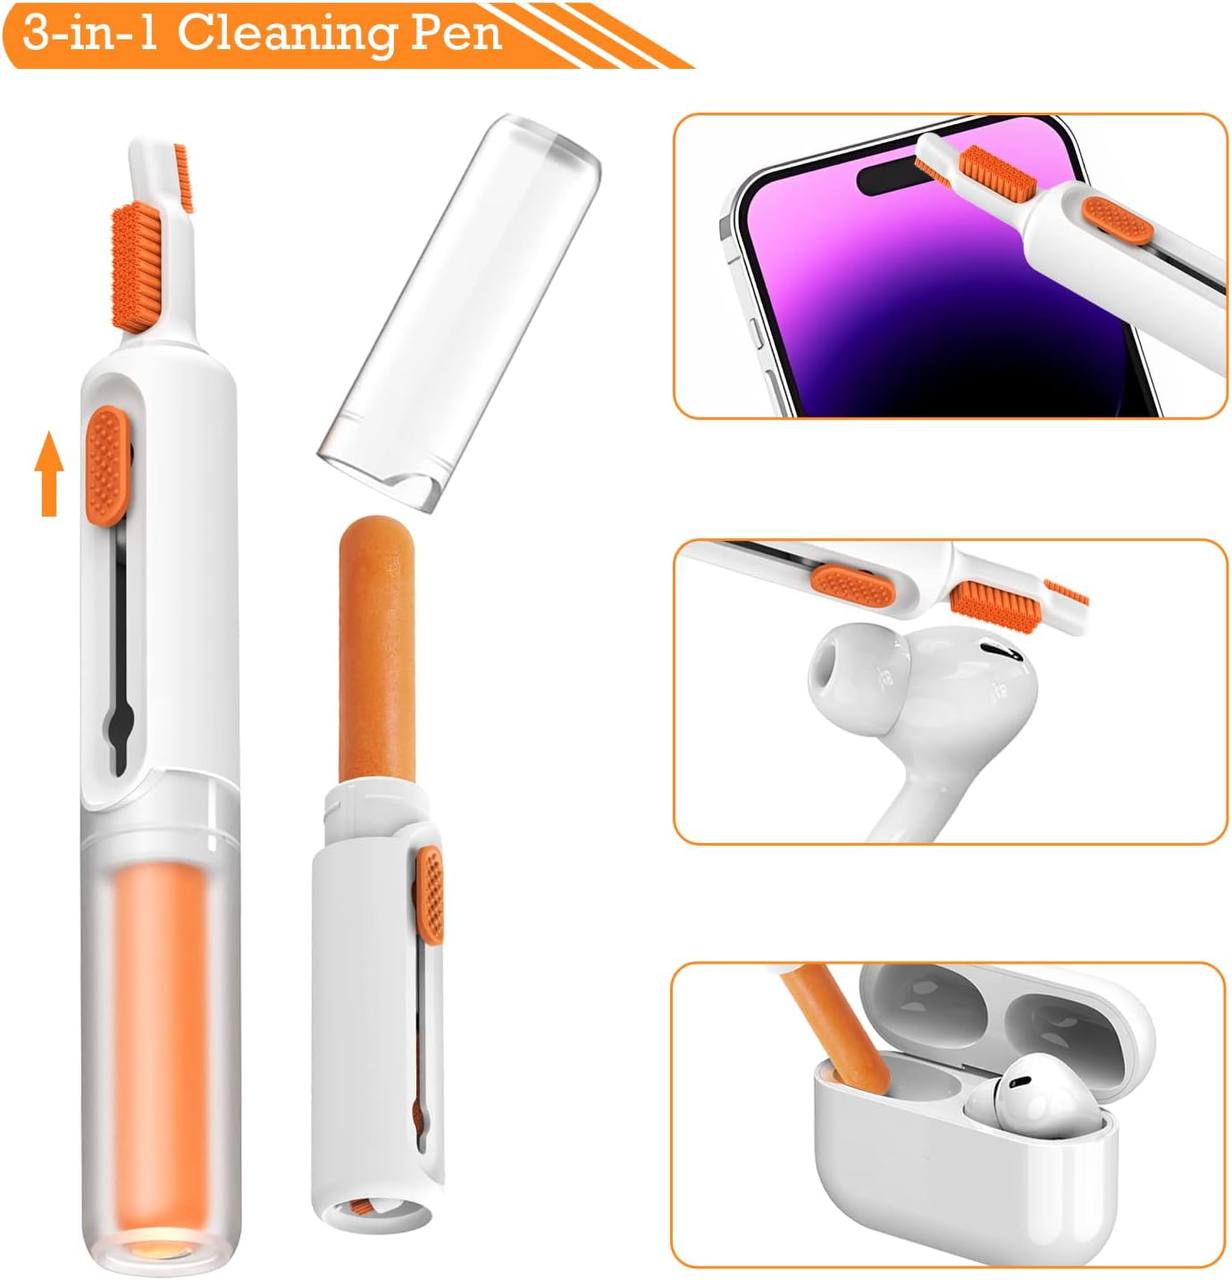 All in one Cleaning kit